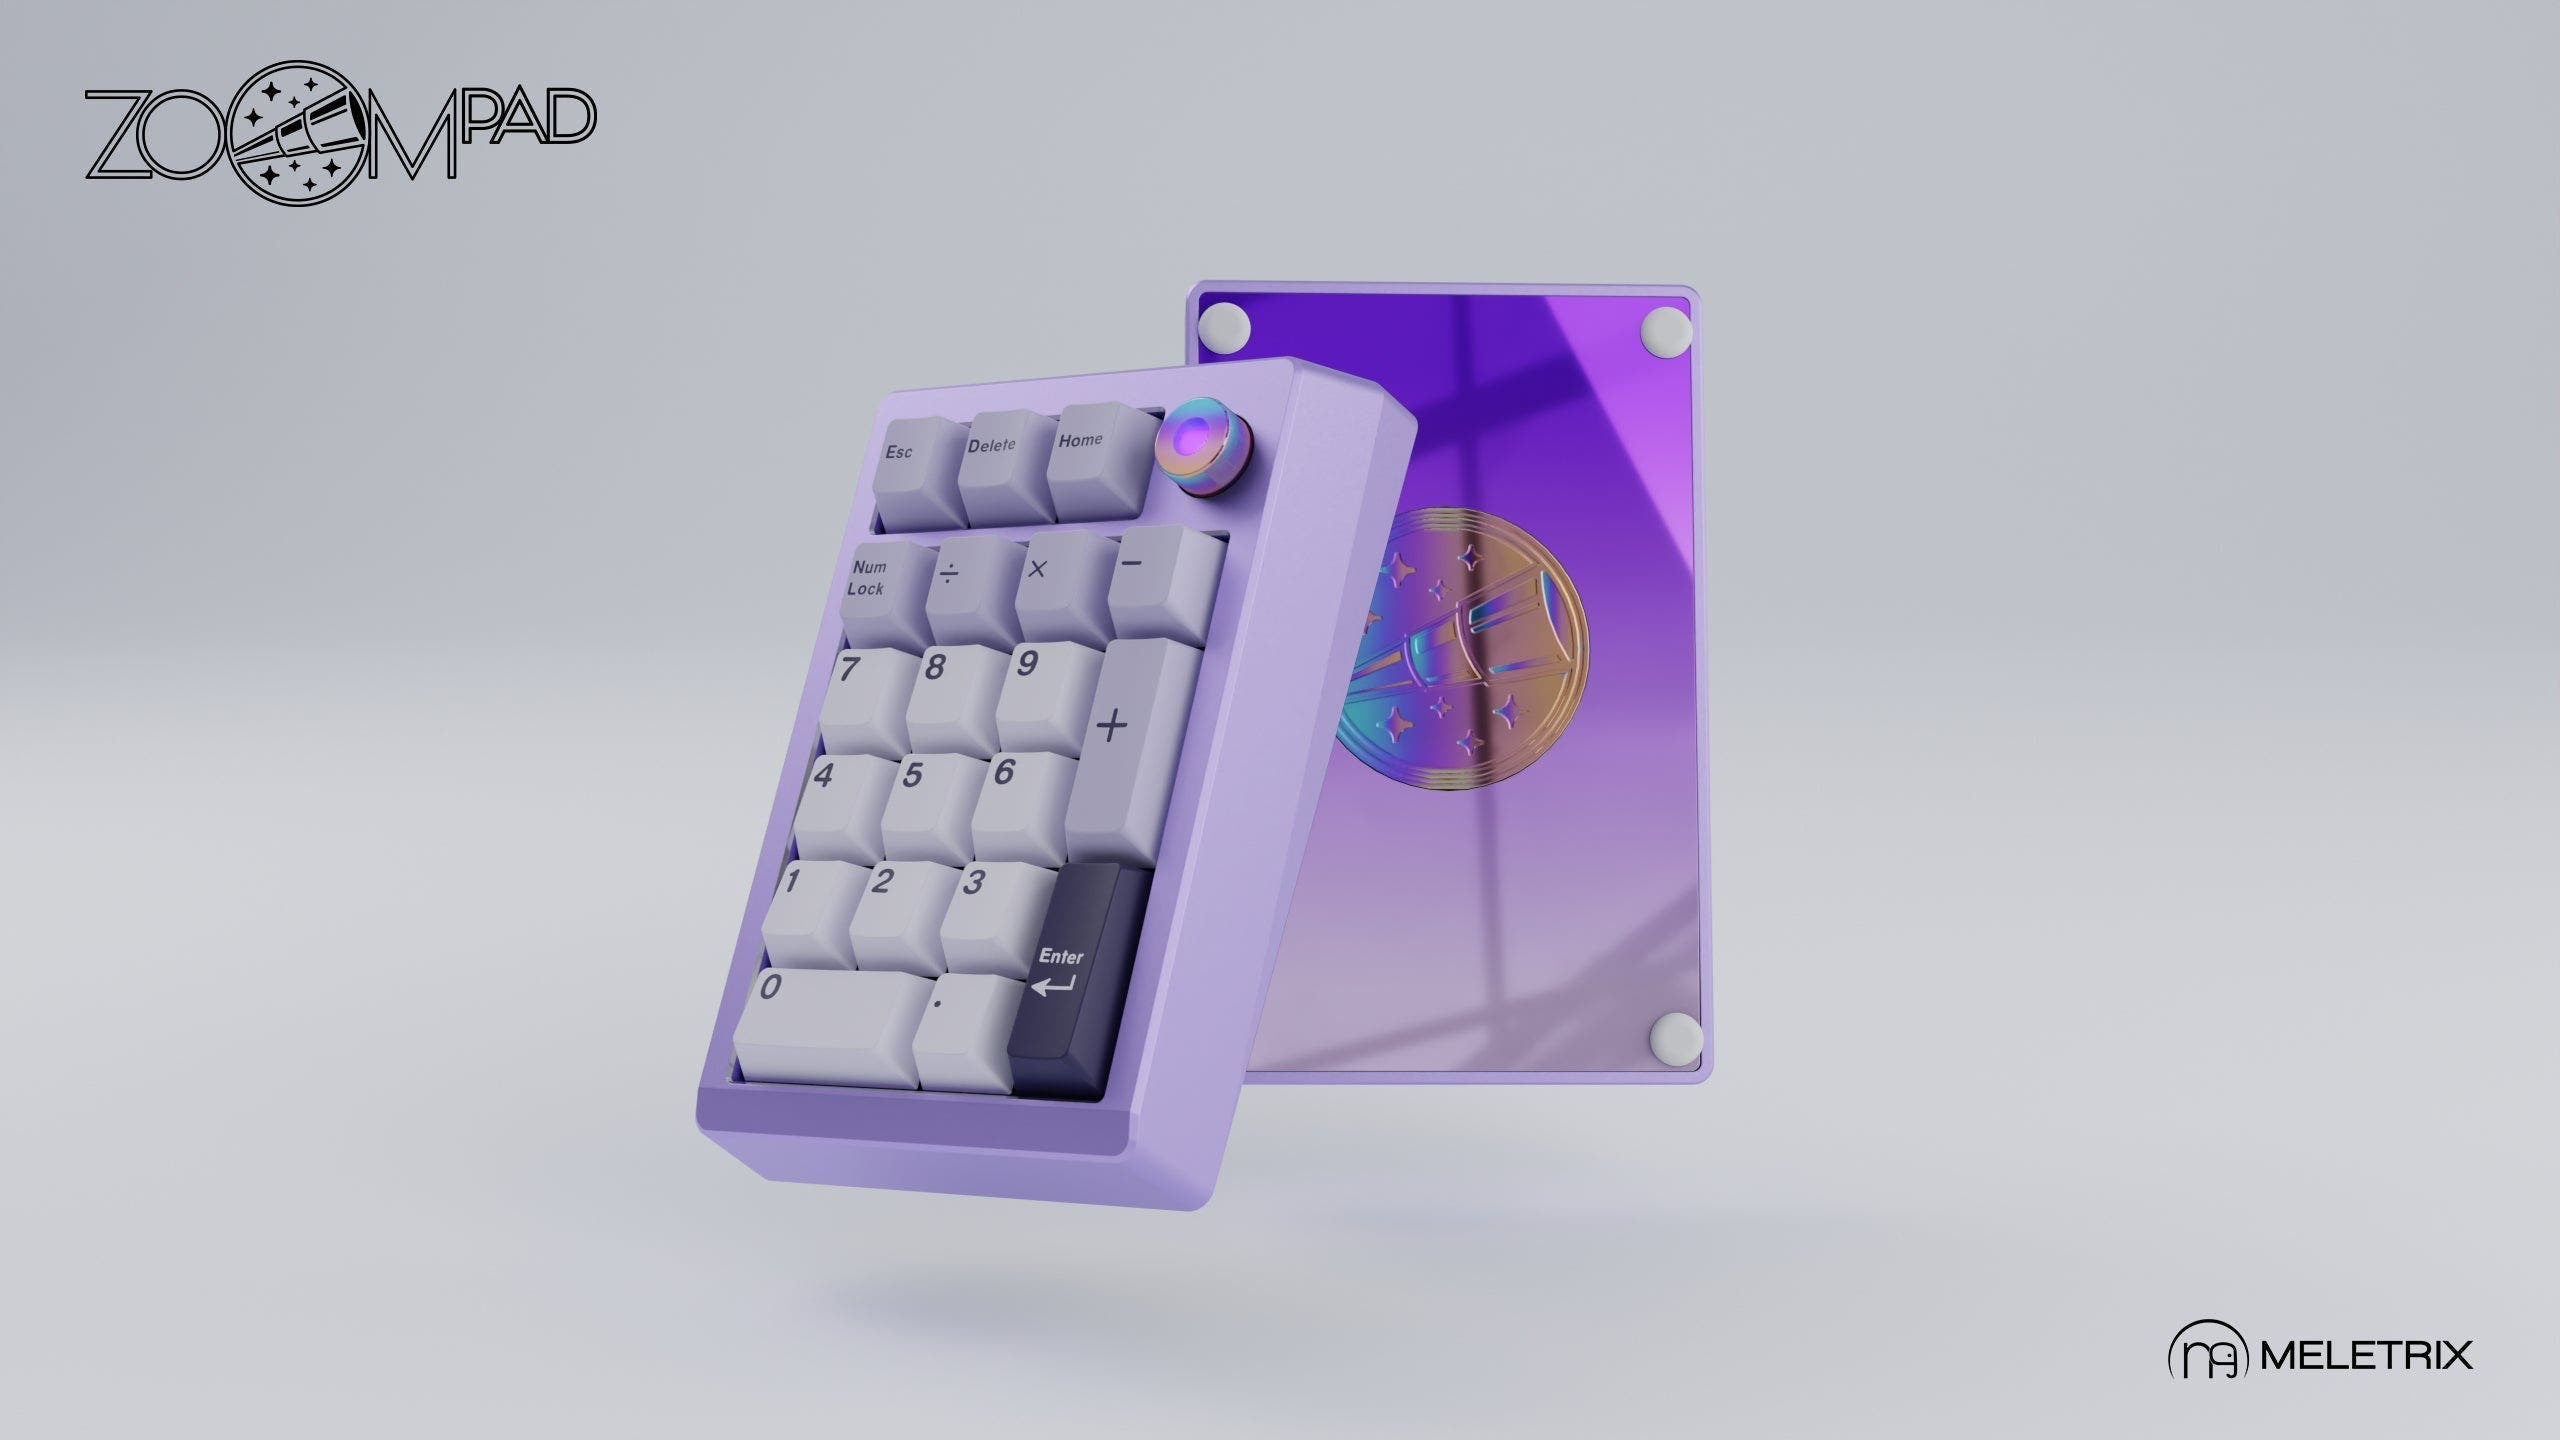 Meletrix ZoomPad Special Edition (SE) - Barebones Numpad Kit Normal / Anodized Lavender / Stainless Steel PVD Prism